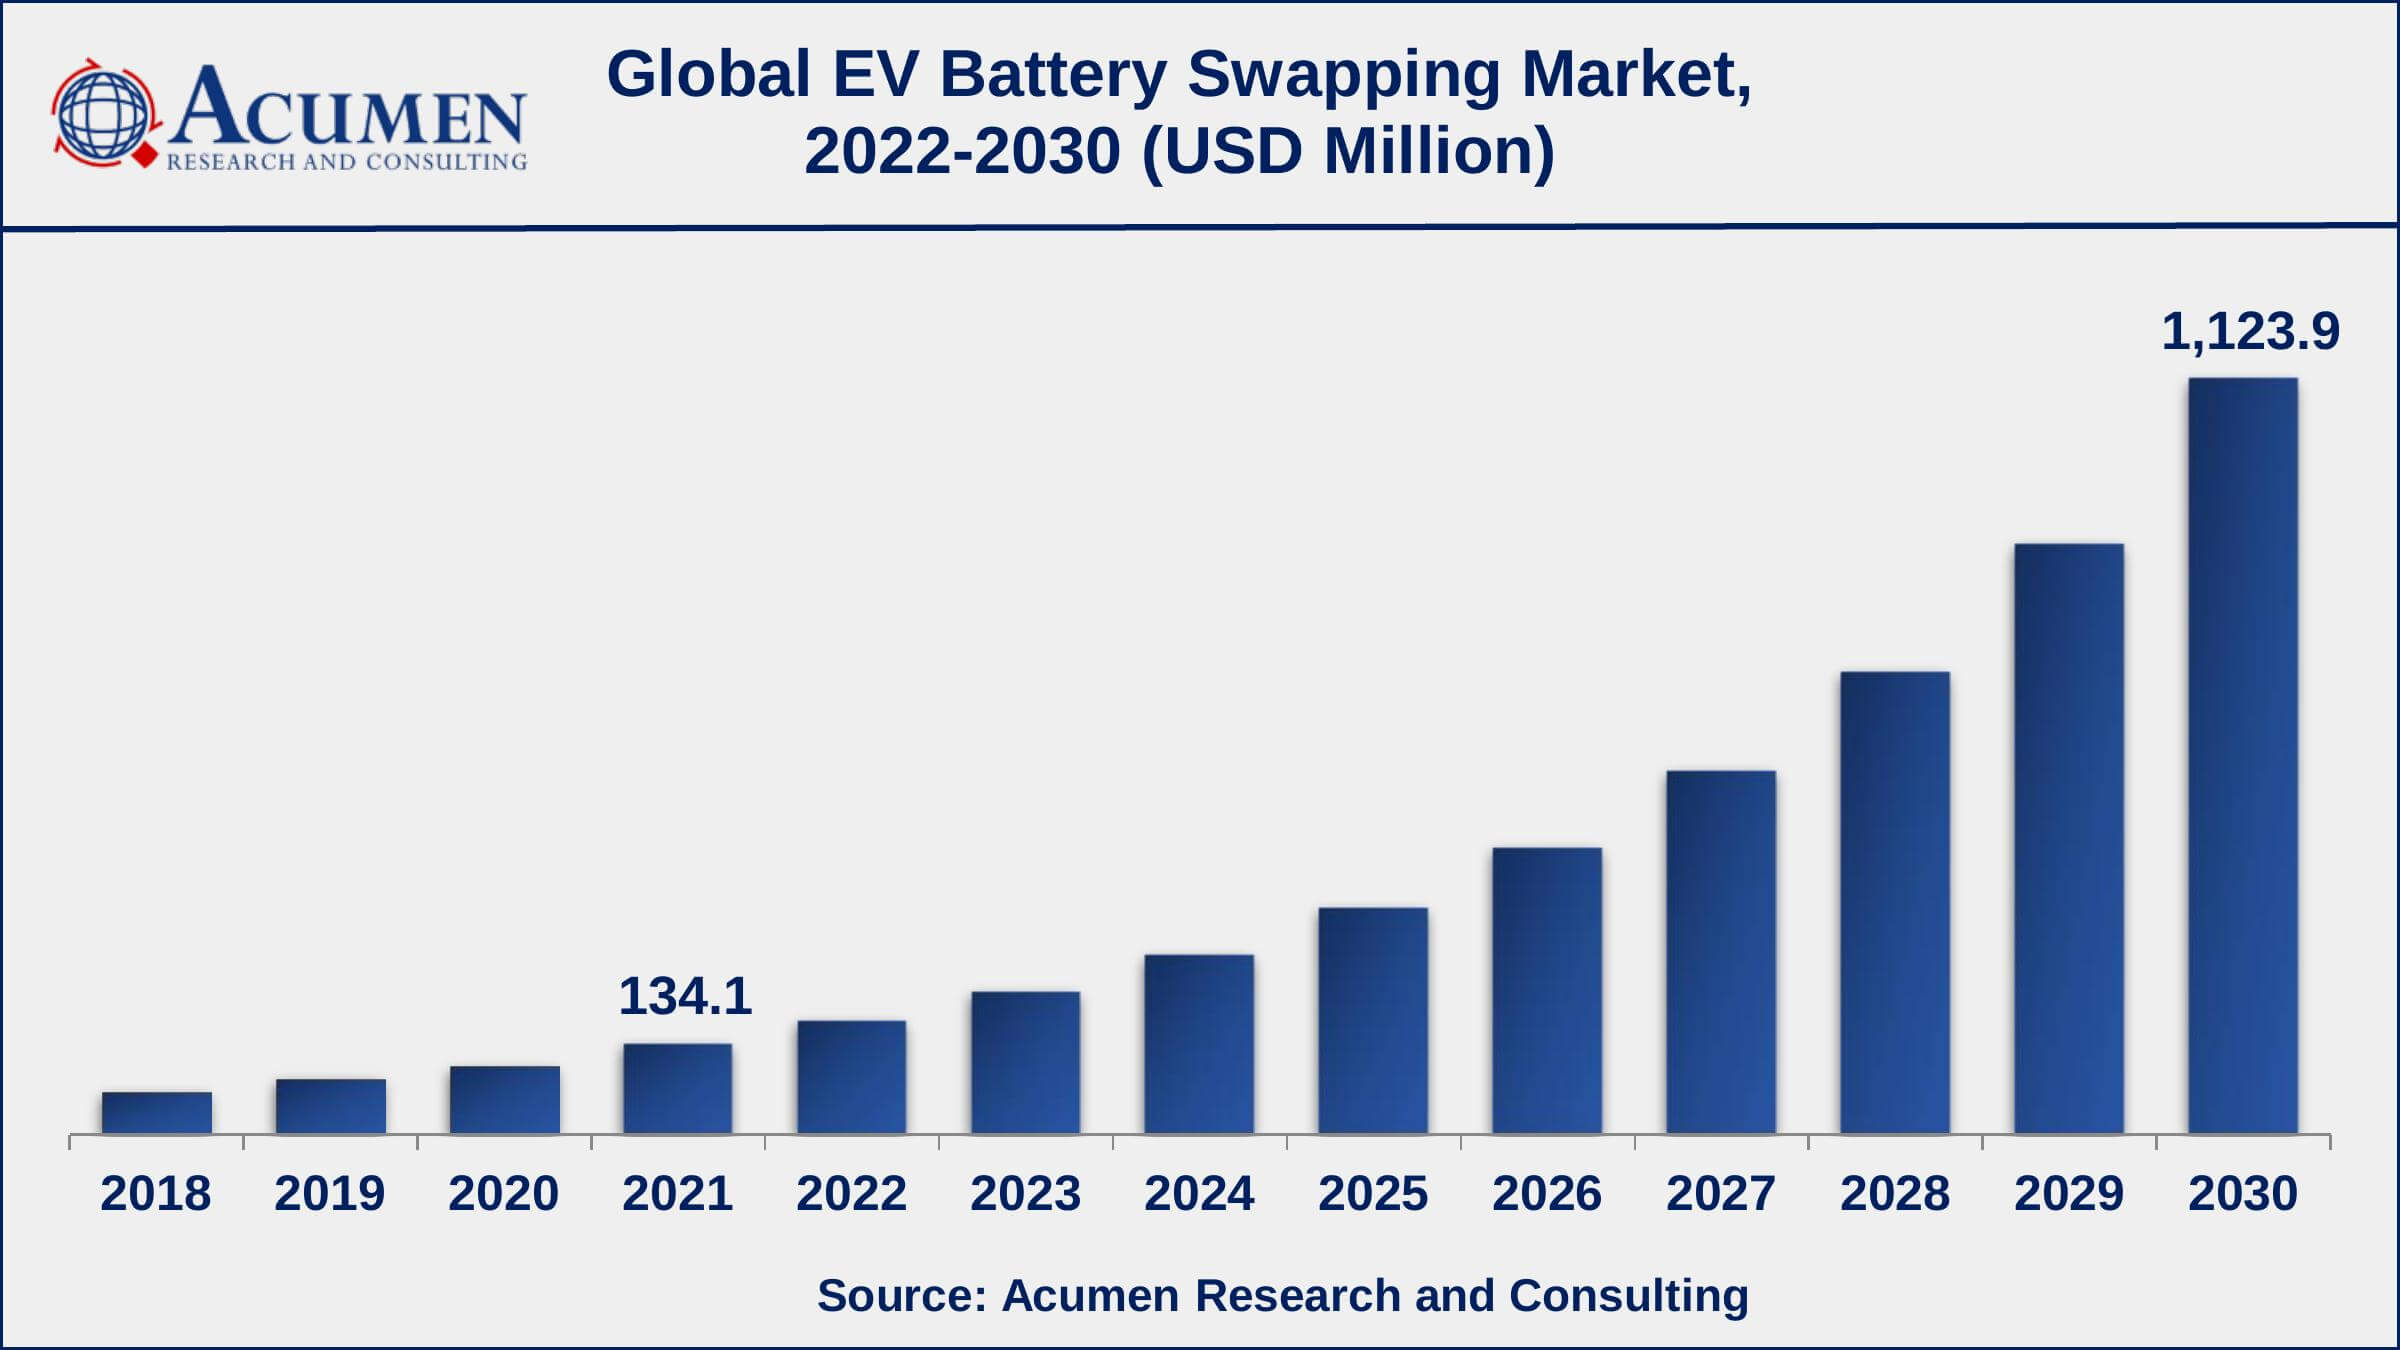 Europe EV battery swapping market growth will record a CAGR of around 28% from 2022 to 2030